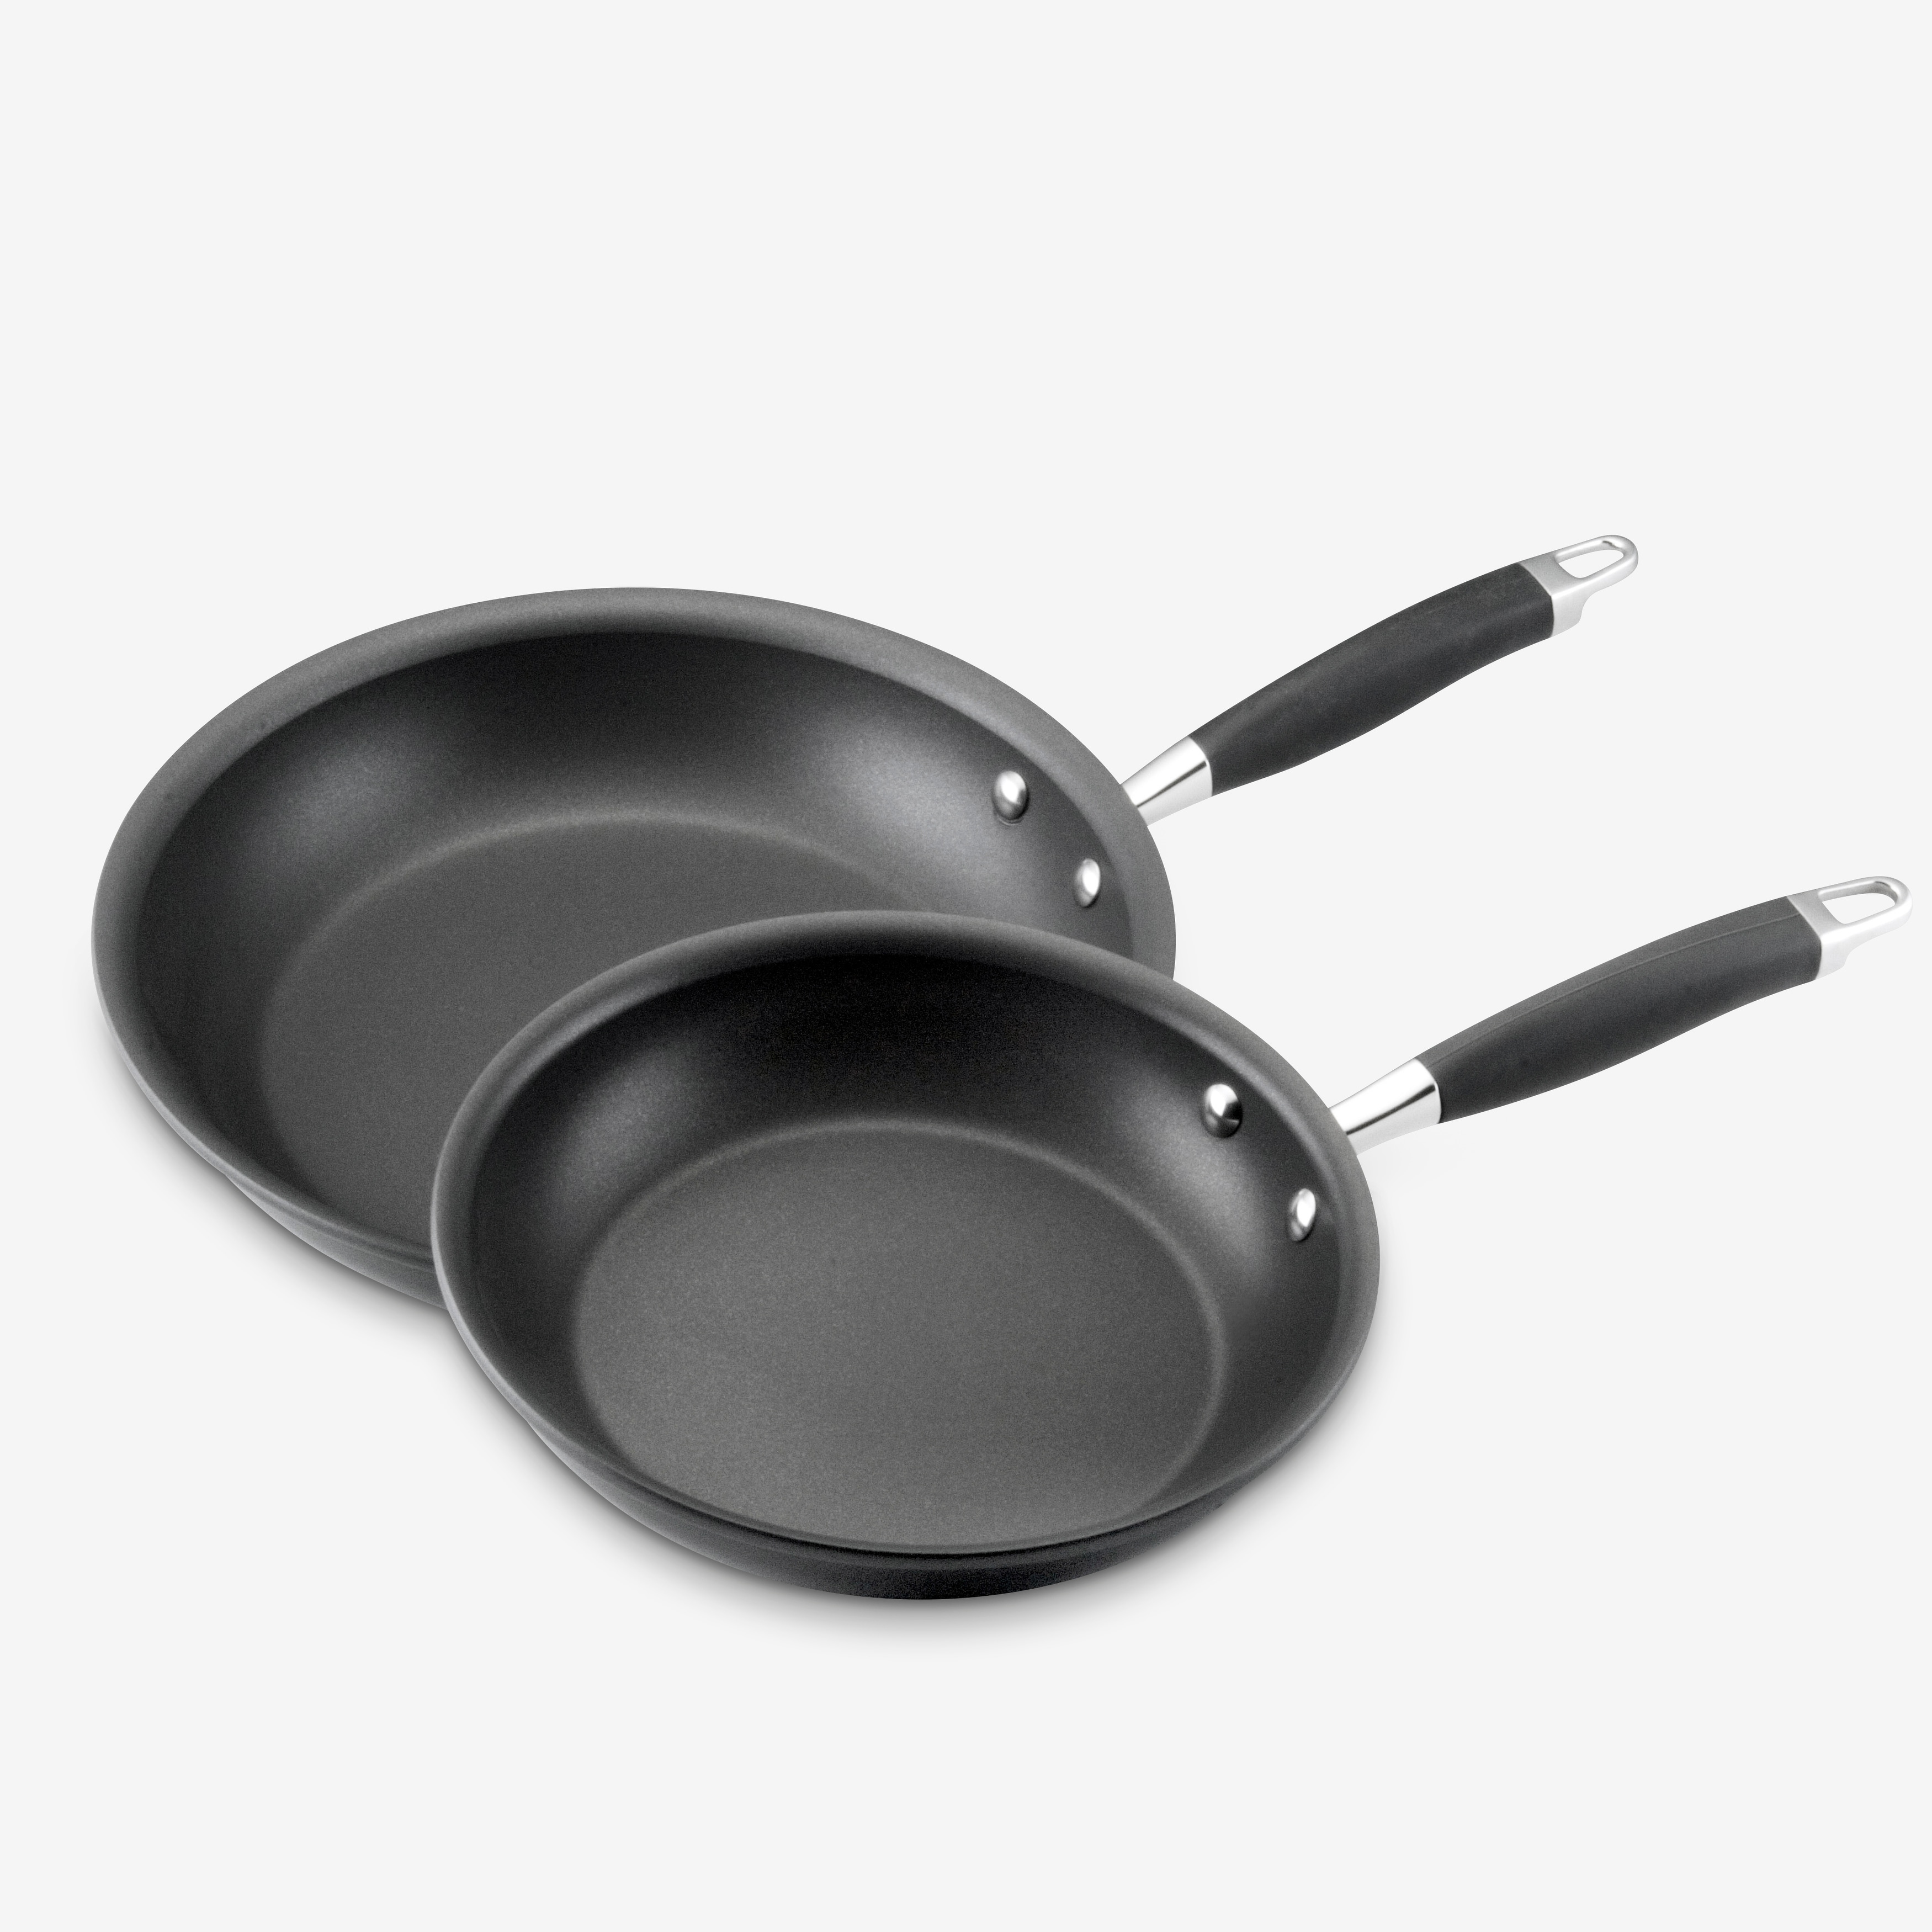 https://ak1.ostkcdn.com/images/products/is/images/direct/b85ee35bc9b6c4b6c9440e904df62a4d93b2a3da/Anolon-Advanced-Hard-Anodized-Nonstick-Frying-Pan-Set%2C-2-Piece%2C-Gray.jpg